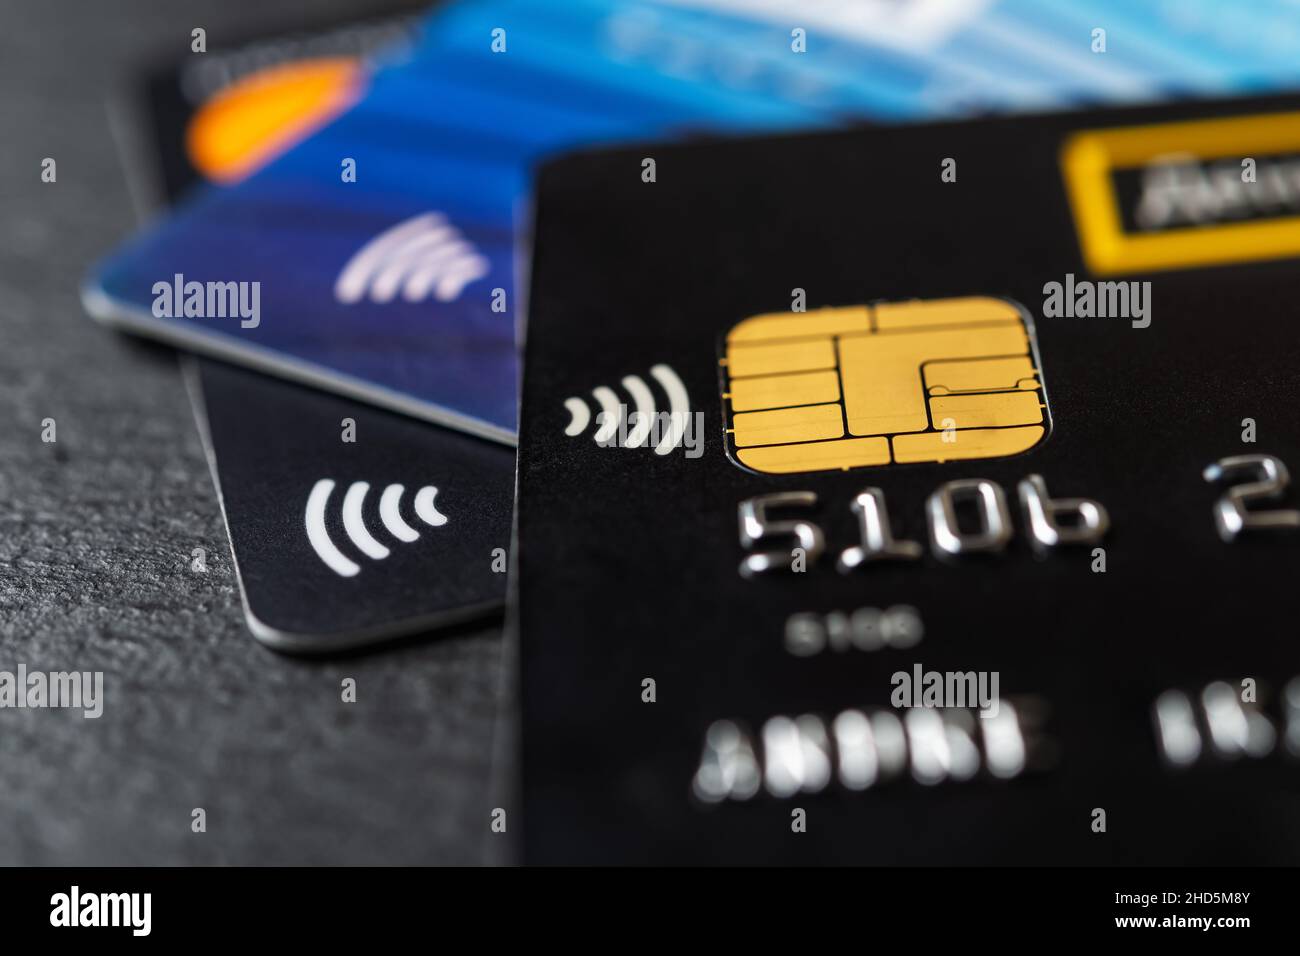 Three credit cards with contactless pay technology macro. Bank charge cards for goods and services payments. Plastic debit card for money transfers. Stock Photo